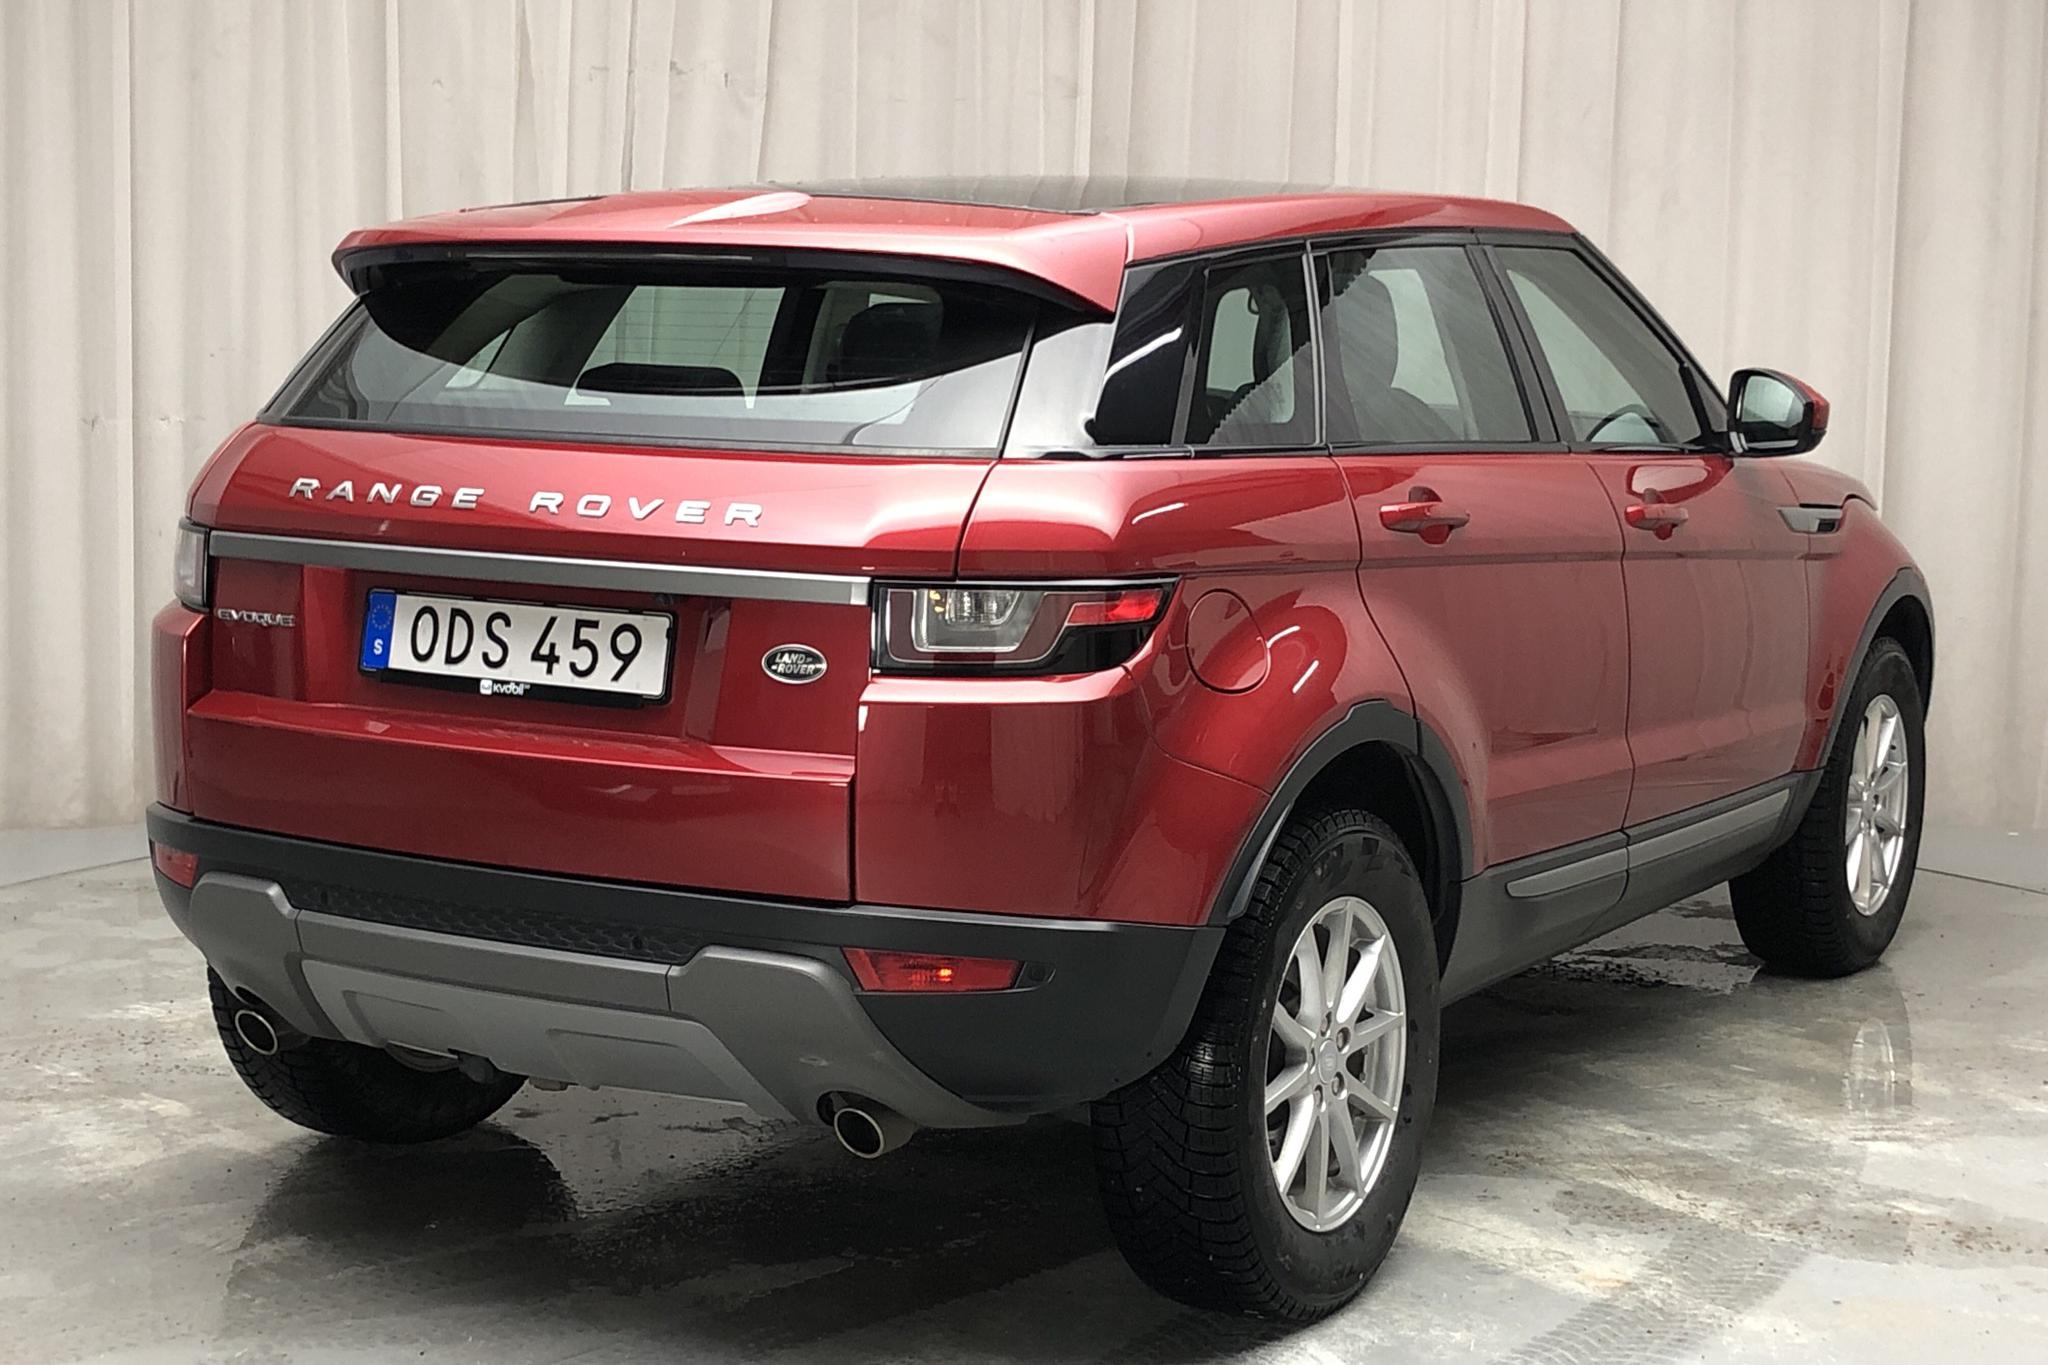 Land Rover Range Rover Evoque 2.0 TD4 AWD 5dr (150hk) - 96 230 km - Automatic - red - 2016